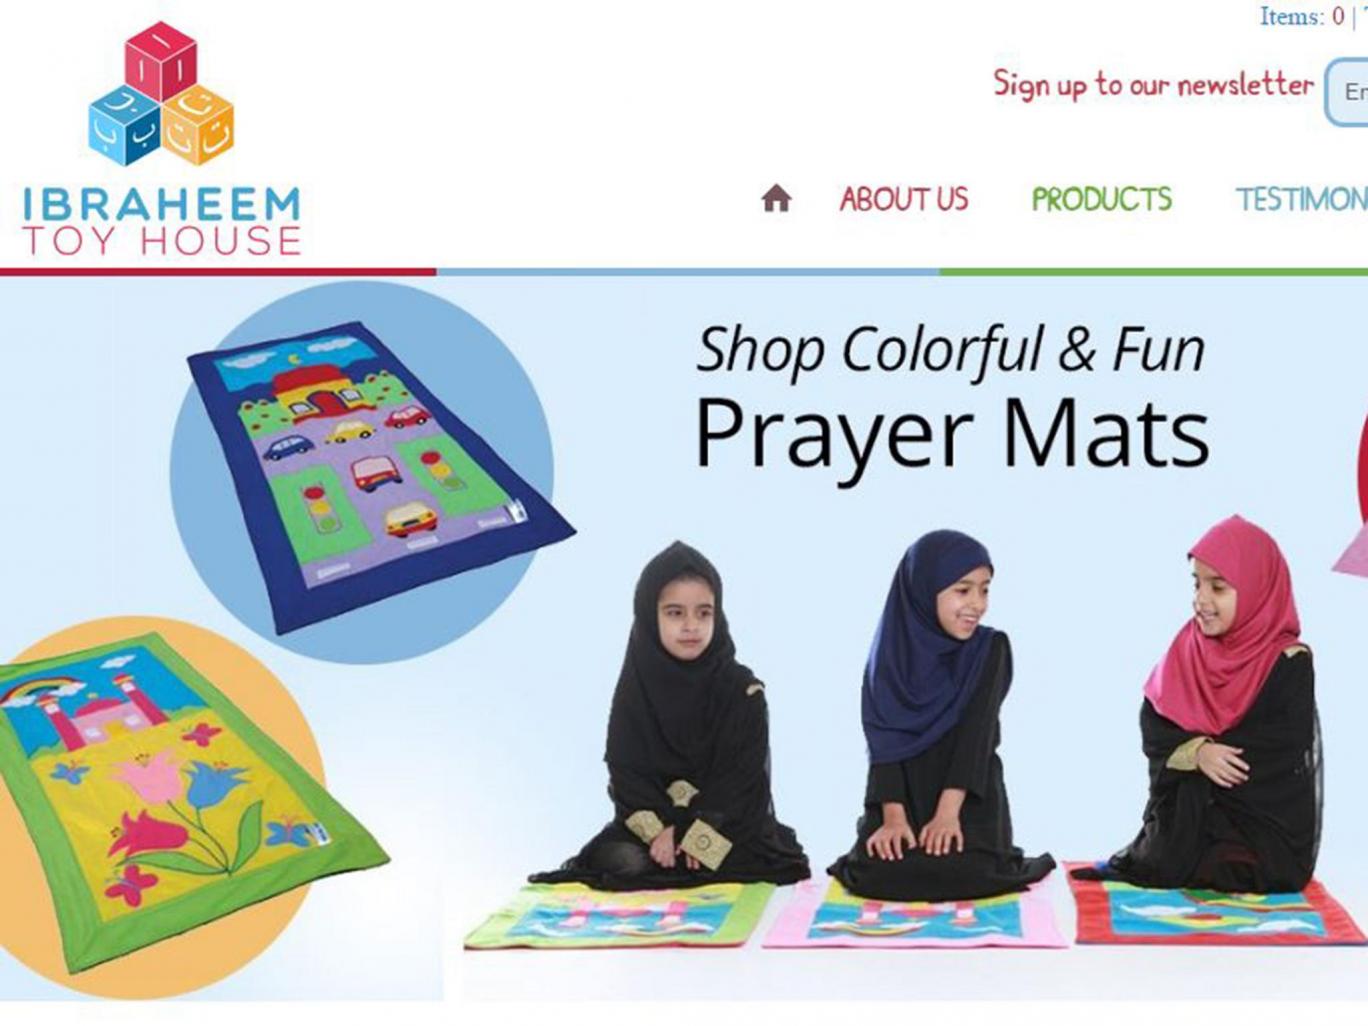 Islamic toy shop lets children learn about their religion through play and helps fight extremism